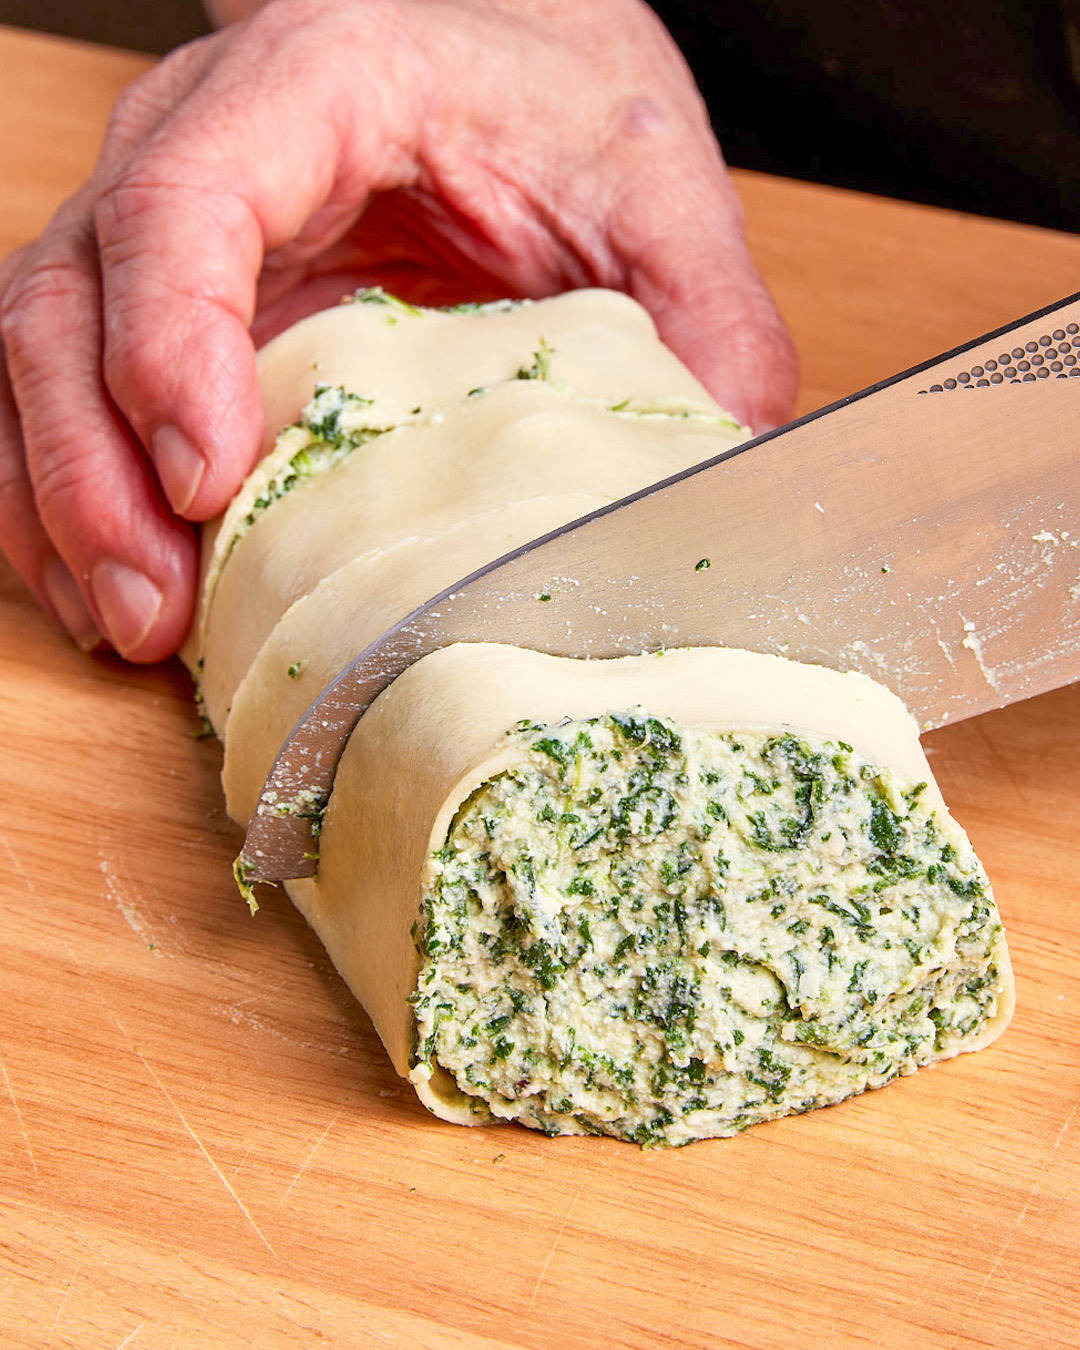 6. Using a chef’s knife, carefully cut each chilled pasta roll crosswise into 4 slices, each about 1 inch thick. Try not to the rolls as you cut them.